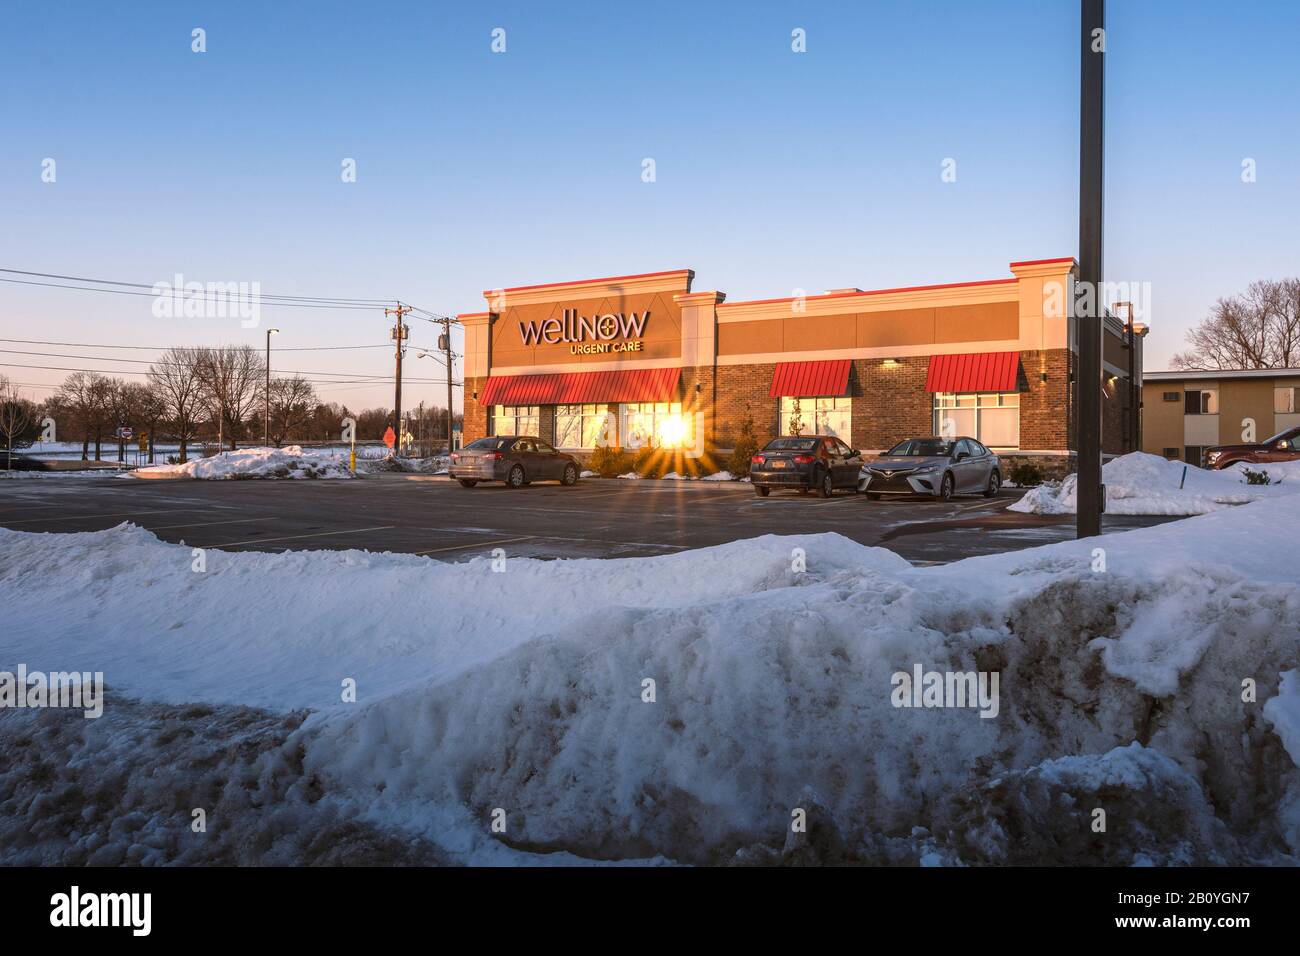 Utica, New York - Feb 21, 2020: Evening View of WellNow Urgent Care, Formerly Five Star Urgent Care, is a Conglomerate of Walk-in Urgent Care Clinics Stock Photo